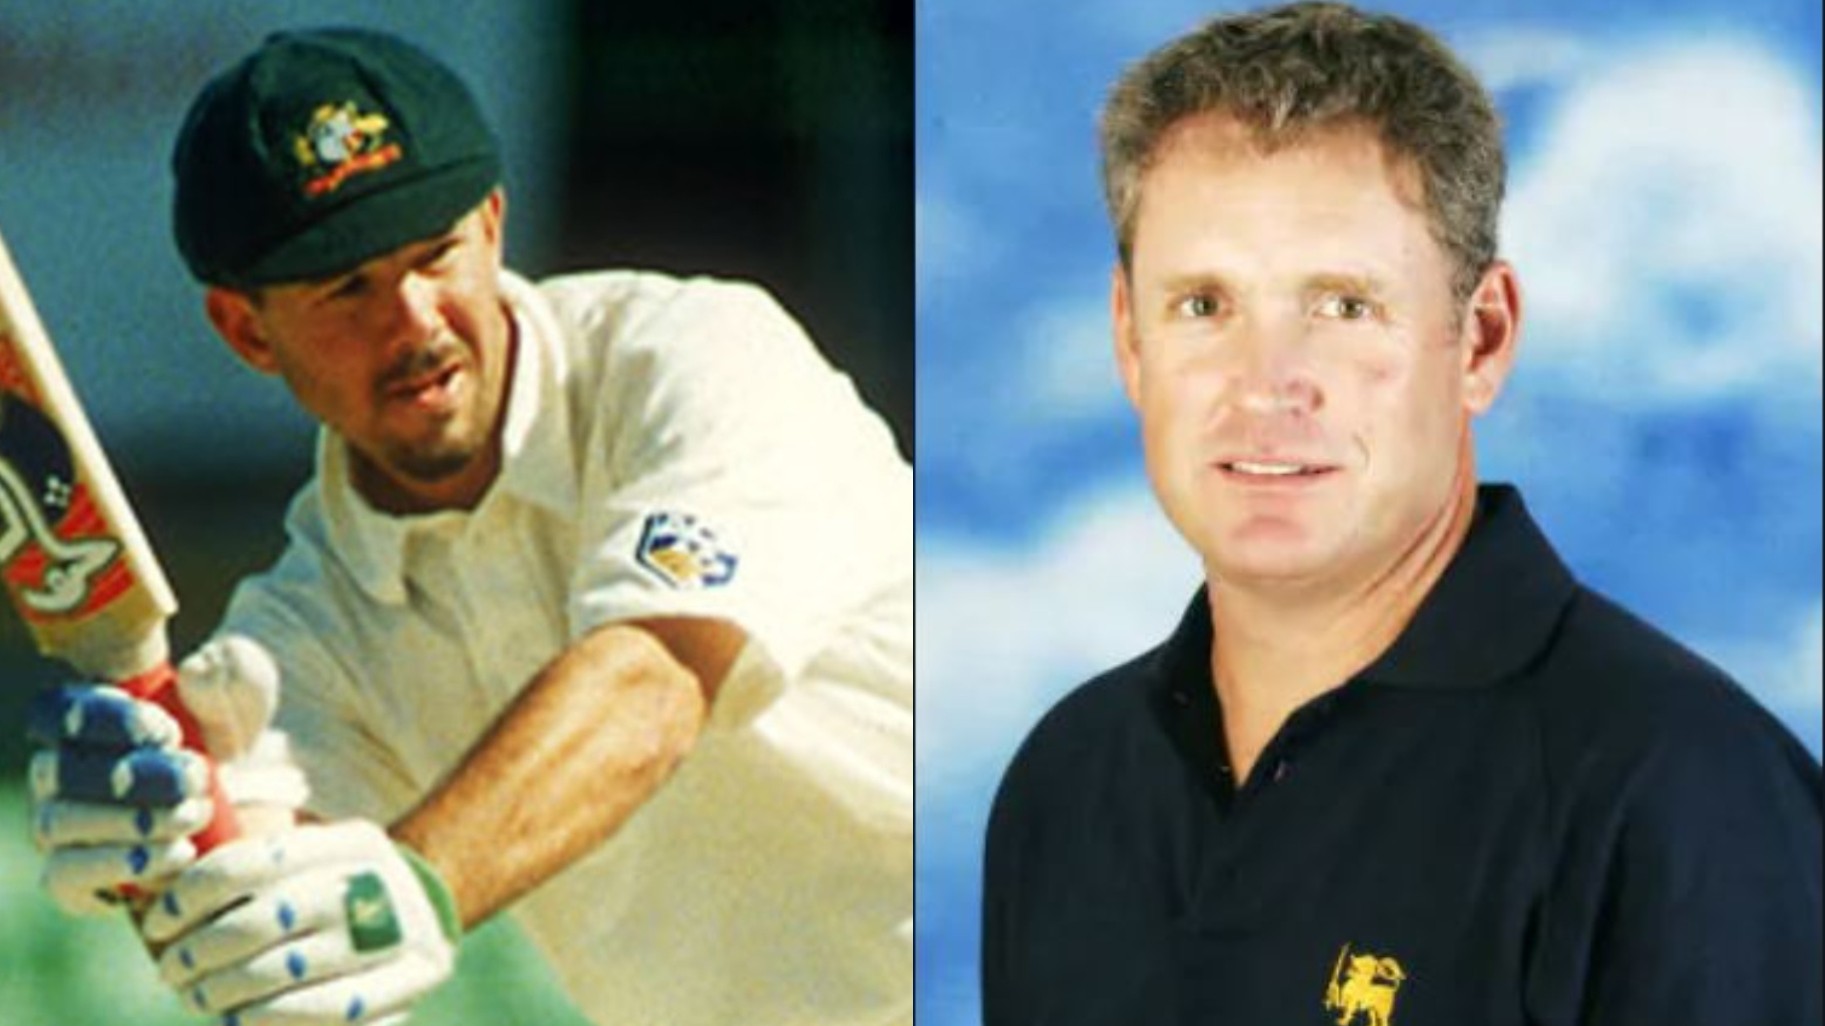 “This kid is gonna be a superstar,” Tom Moody recalls his first impression of a 16-year-old Ricky Ponting